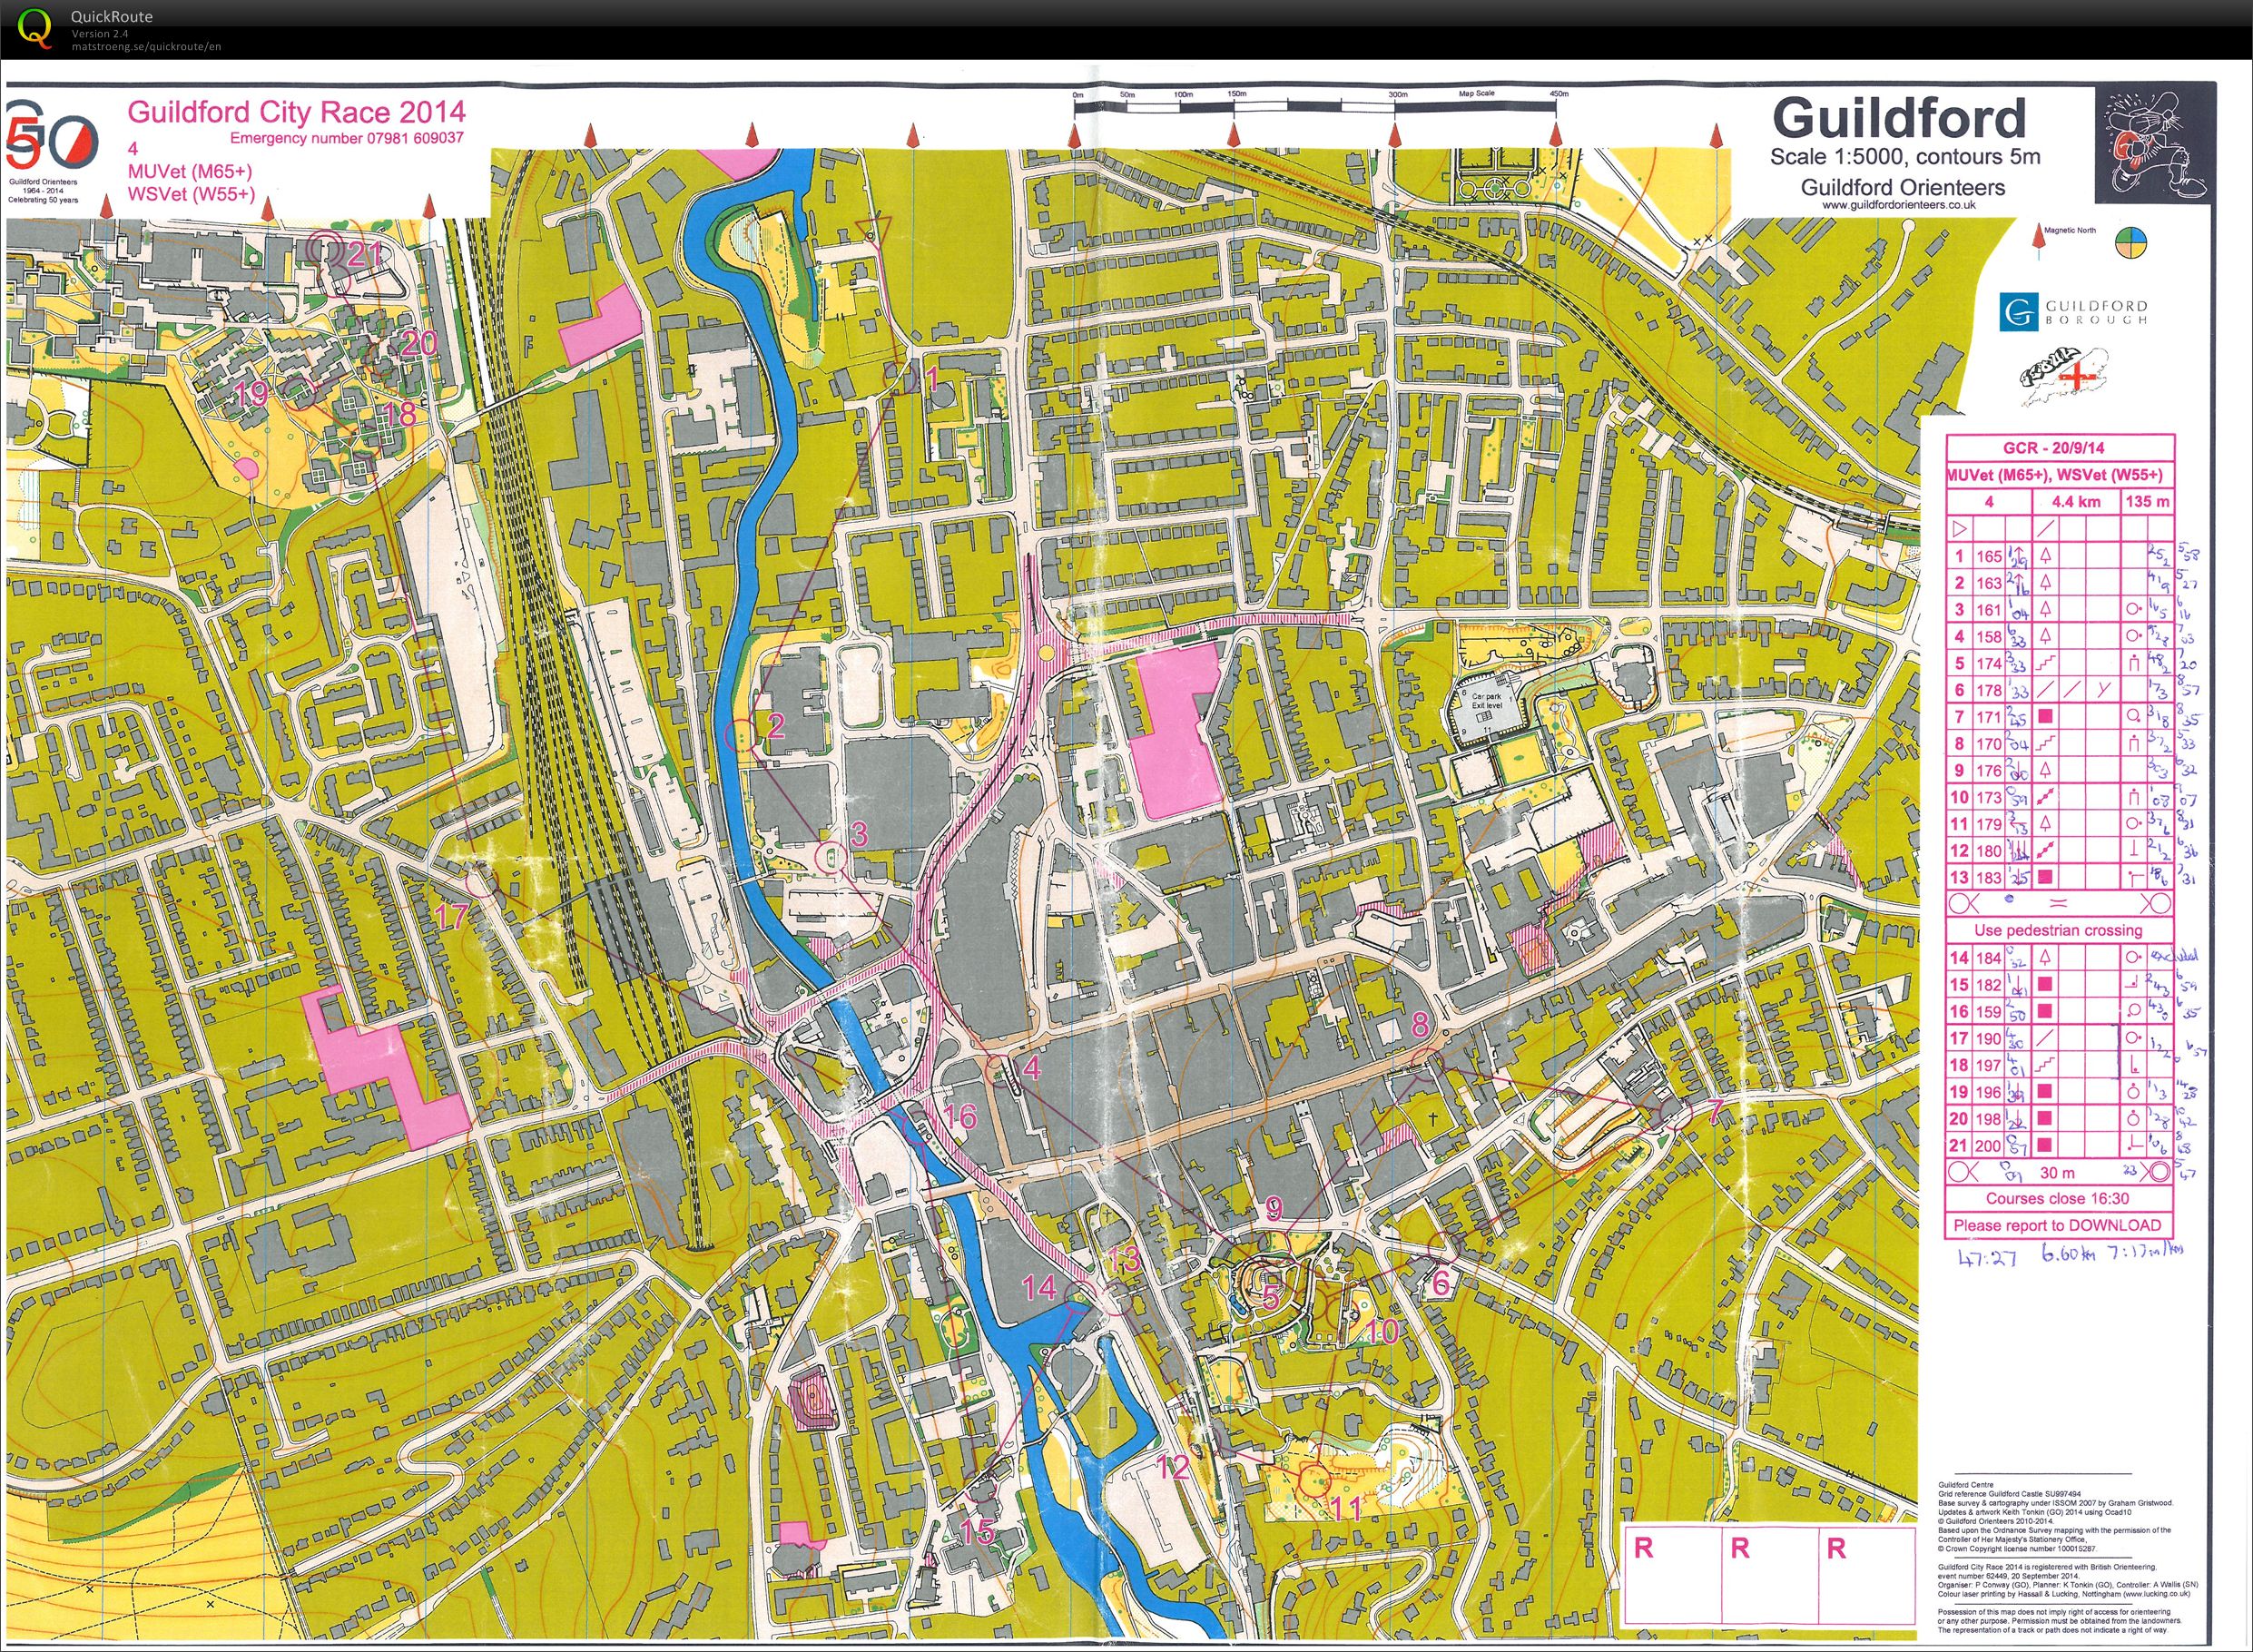 Guildford Urban Race (20.09.2014)